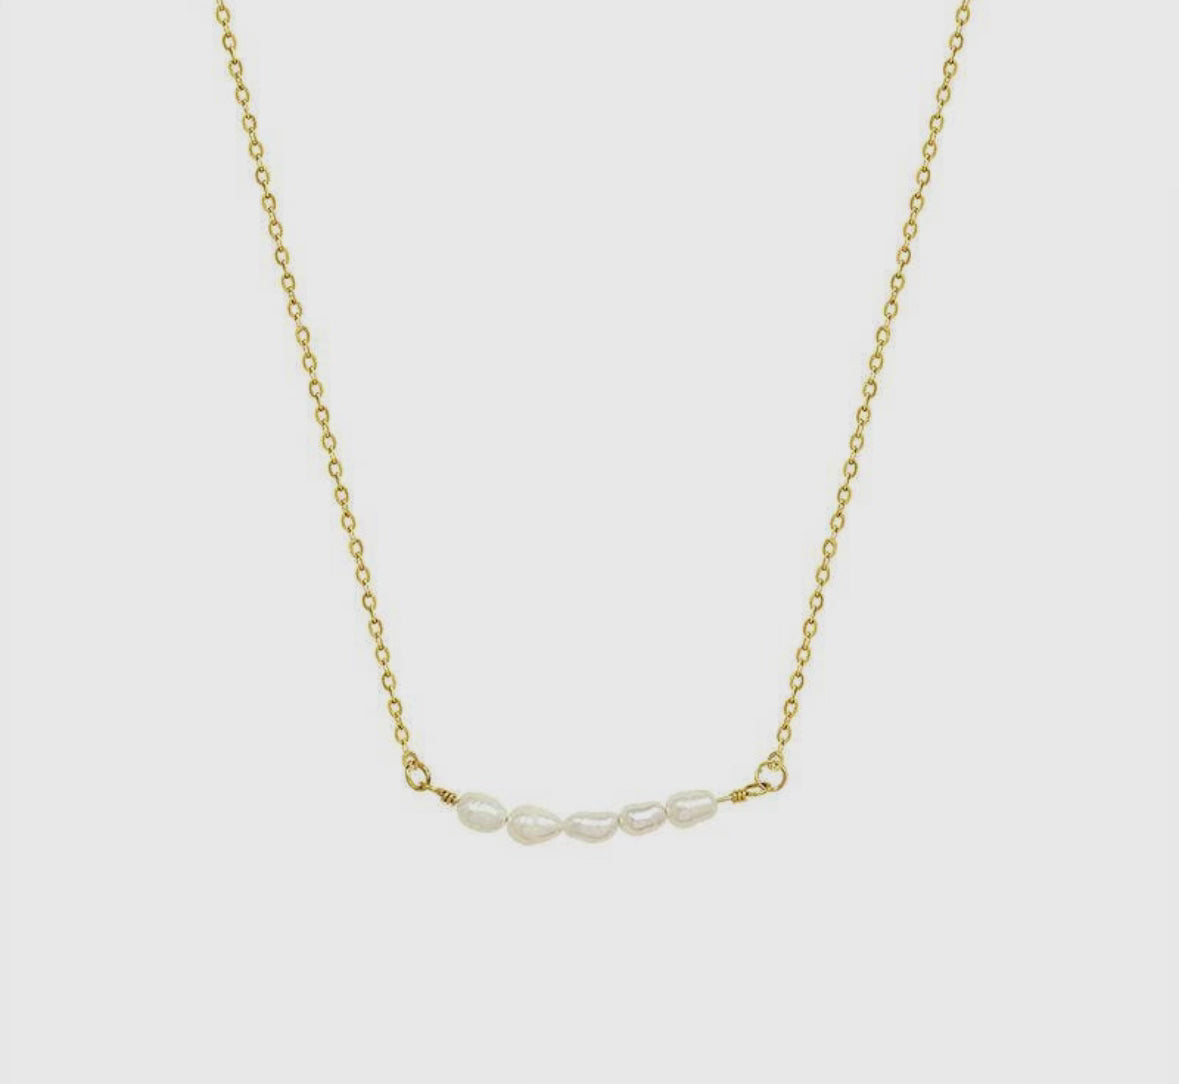 A Getaway Pearl Necklace with three pearls on it.